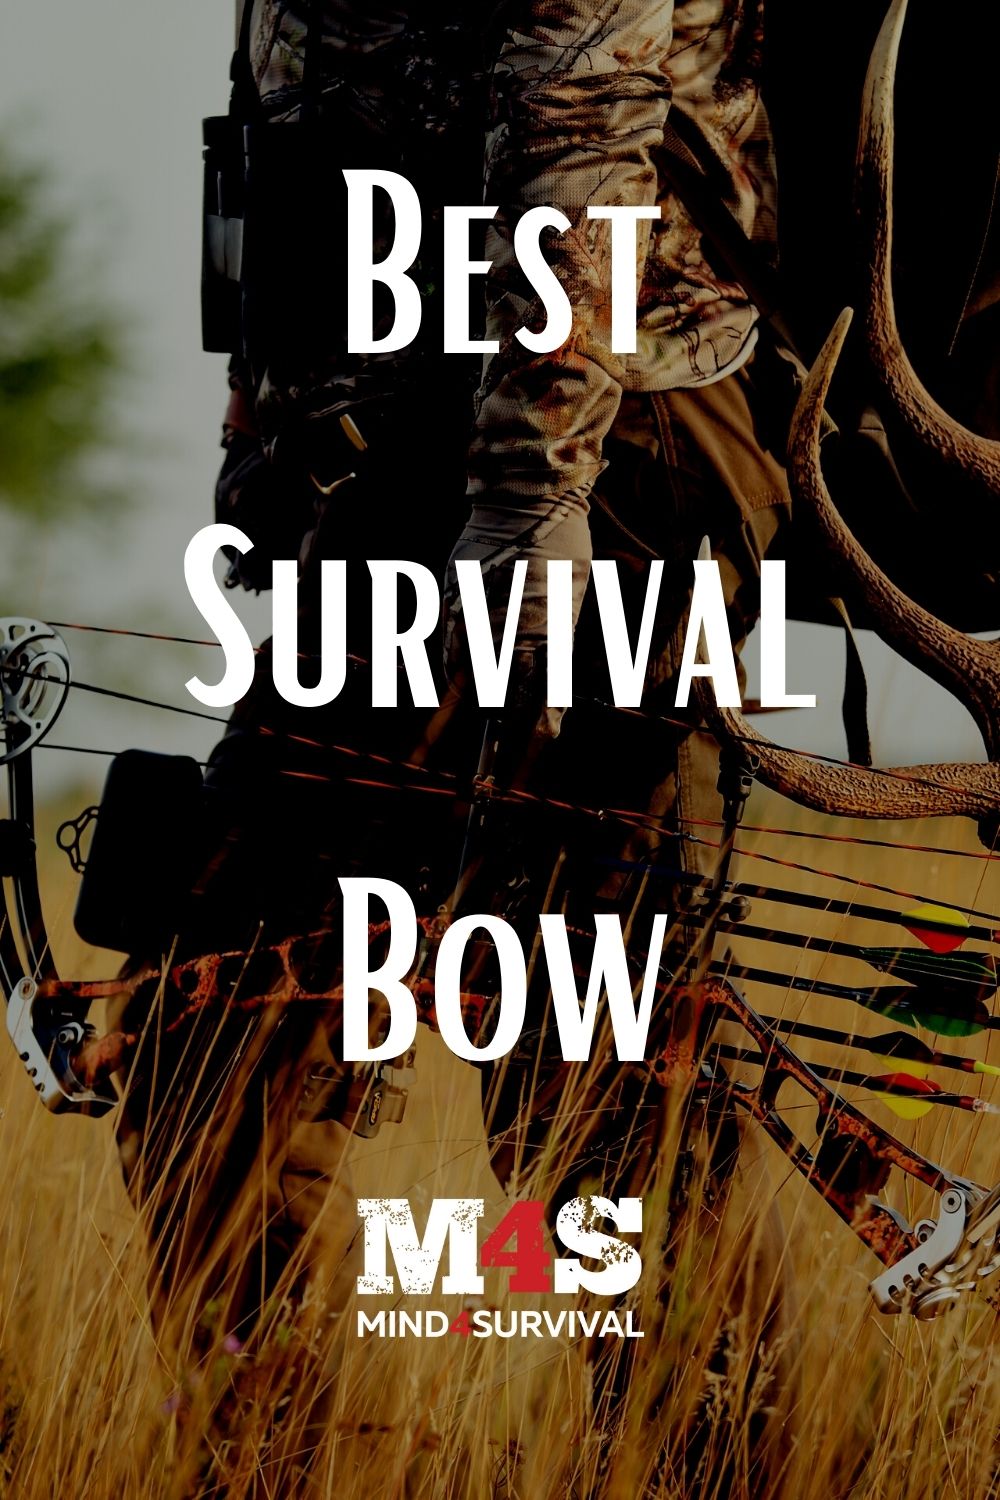 7 Best Survival Bows for Hunting & Self-Defense (2022)